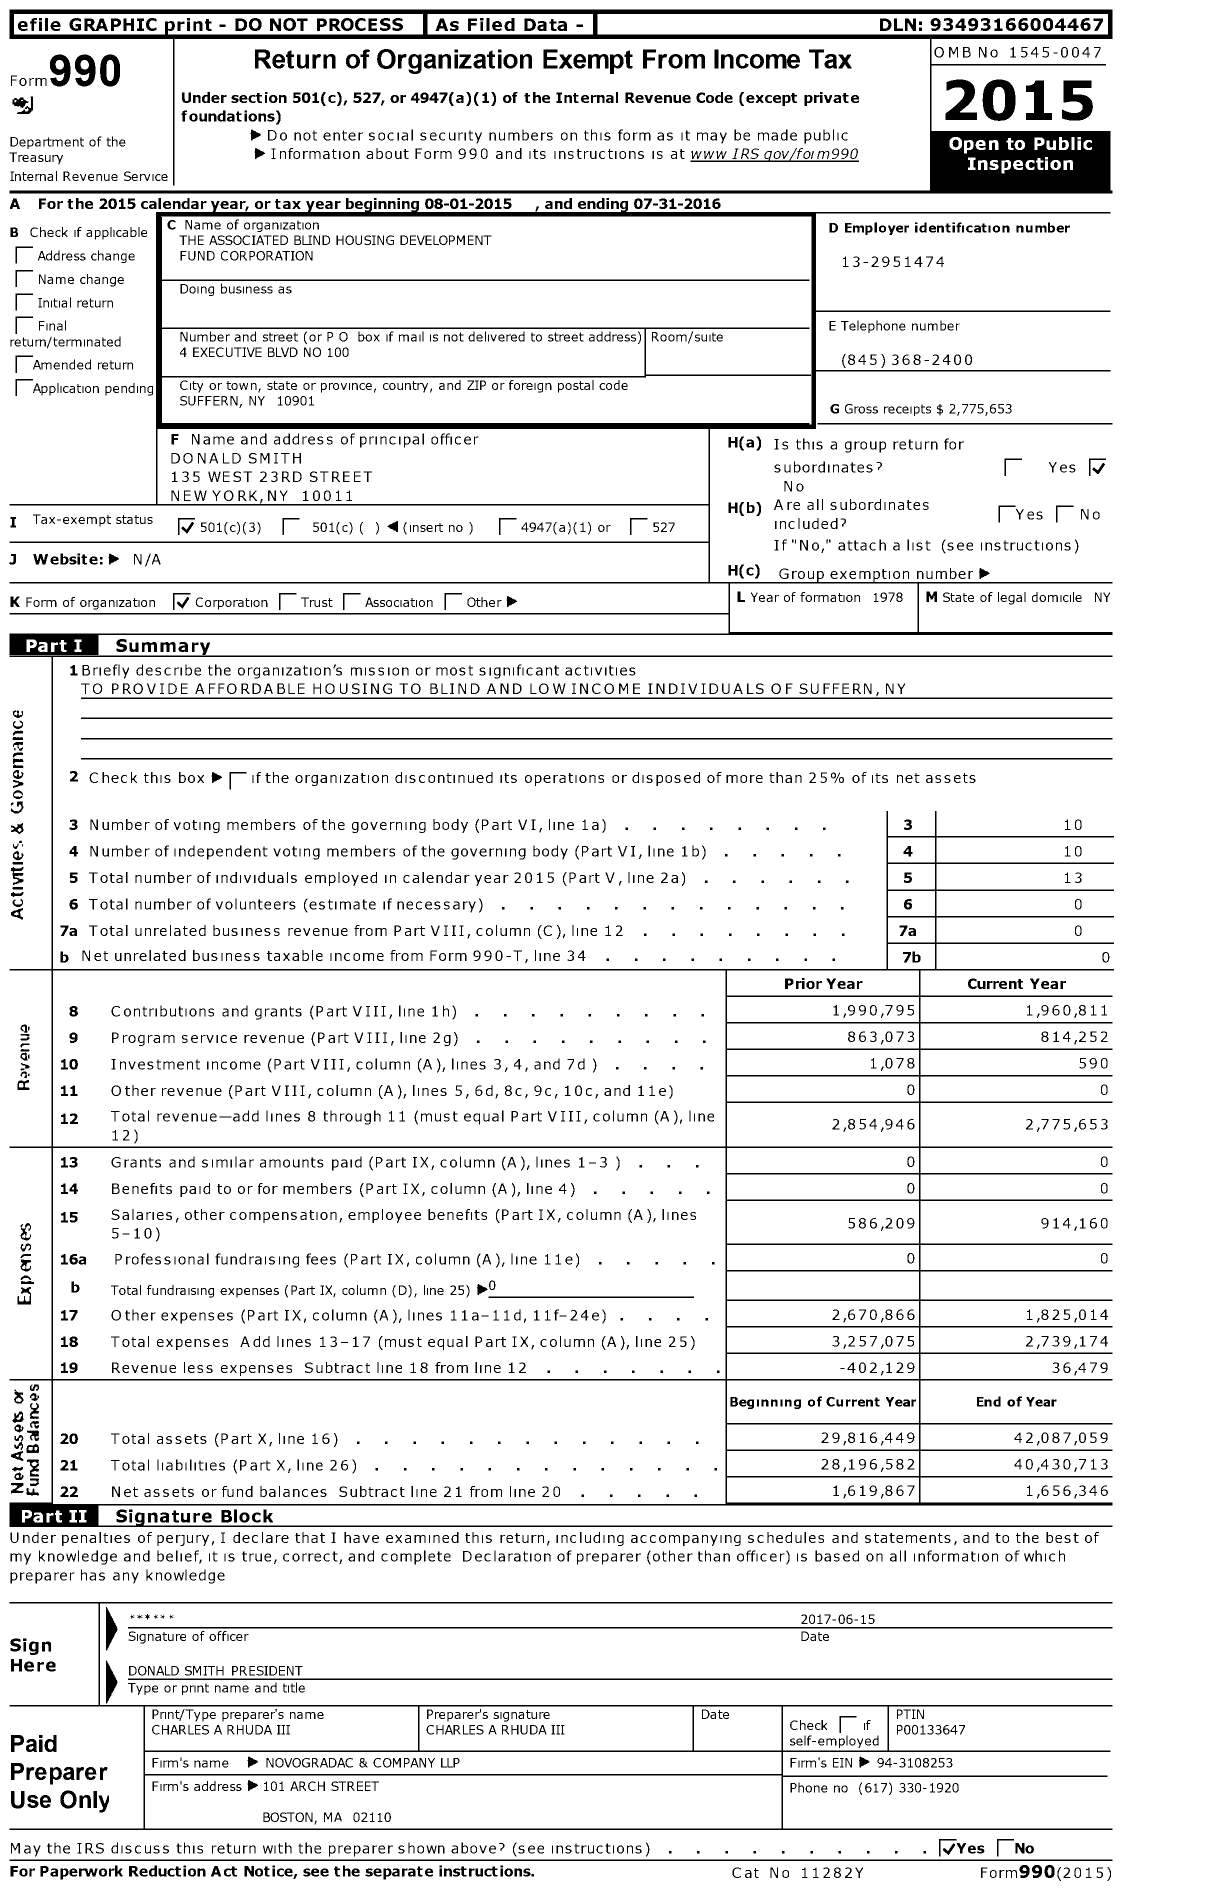 Image of first page of 2015 Form 990 for The Associated Blind Housing Development Fund Corporation